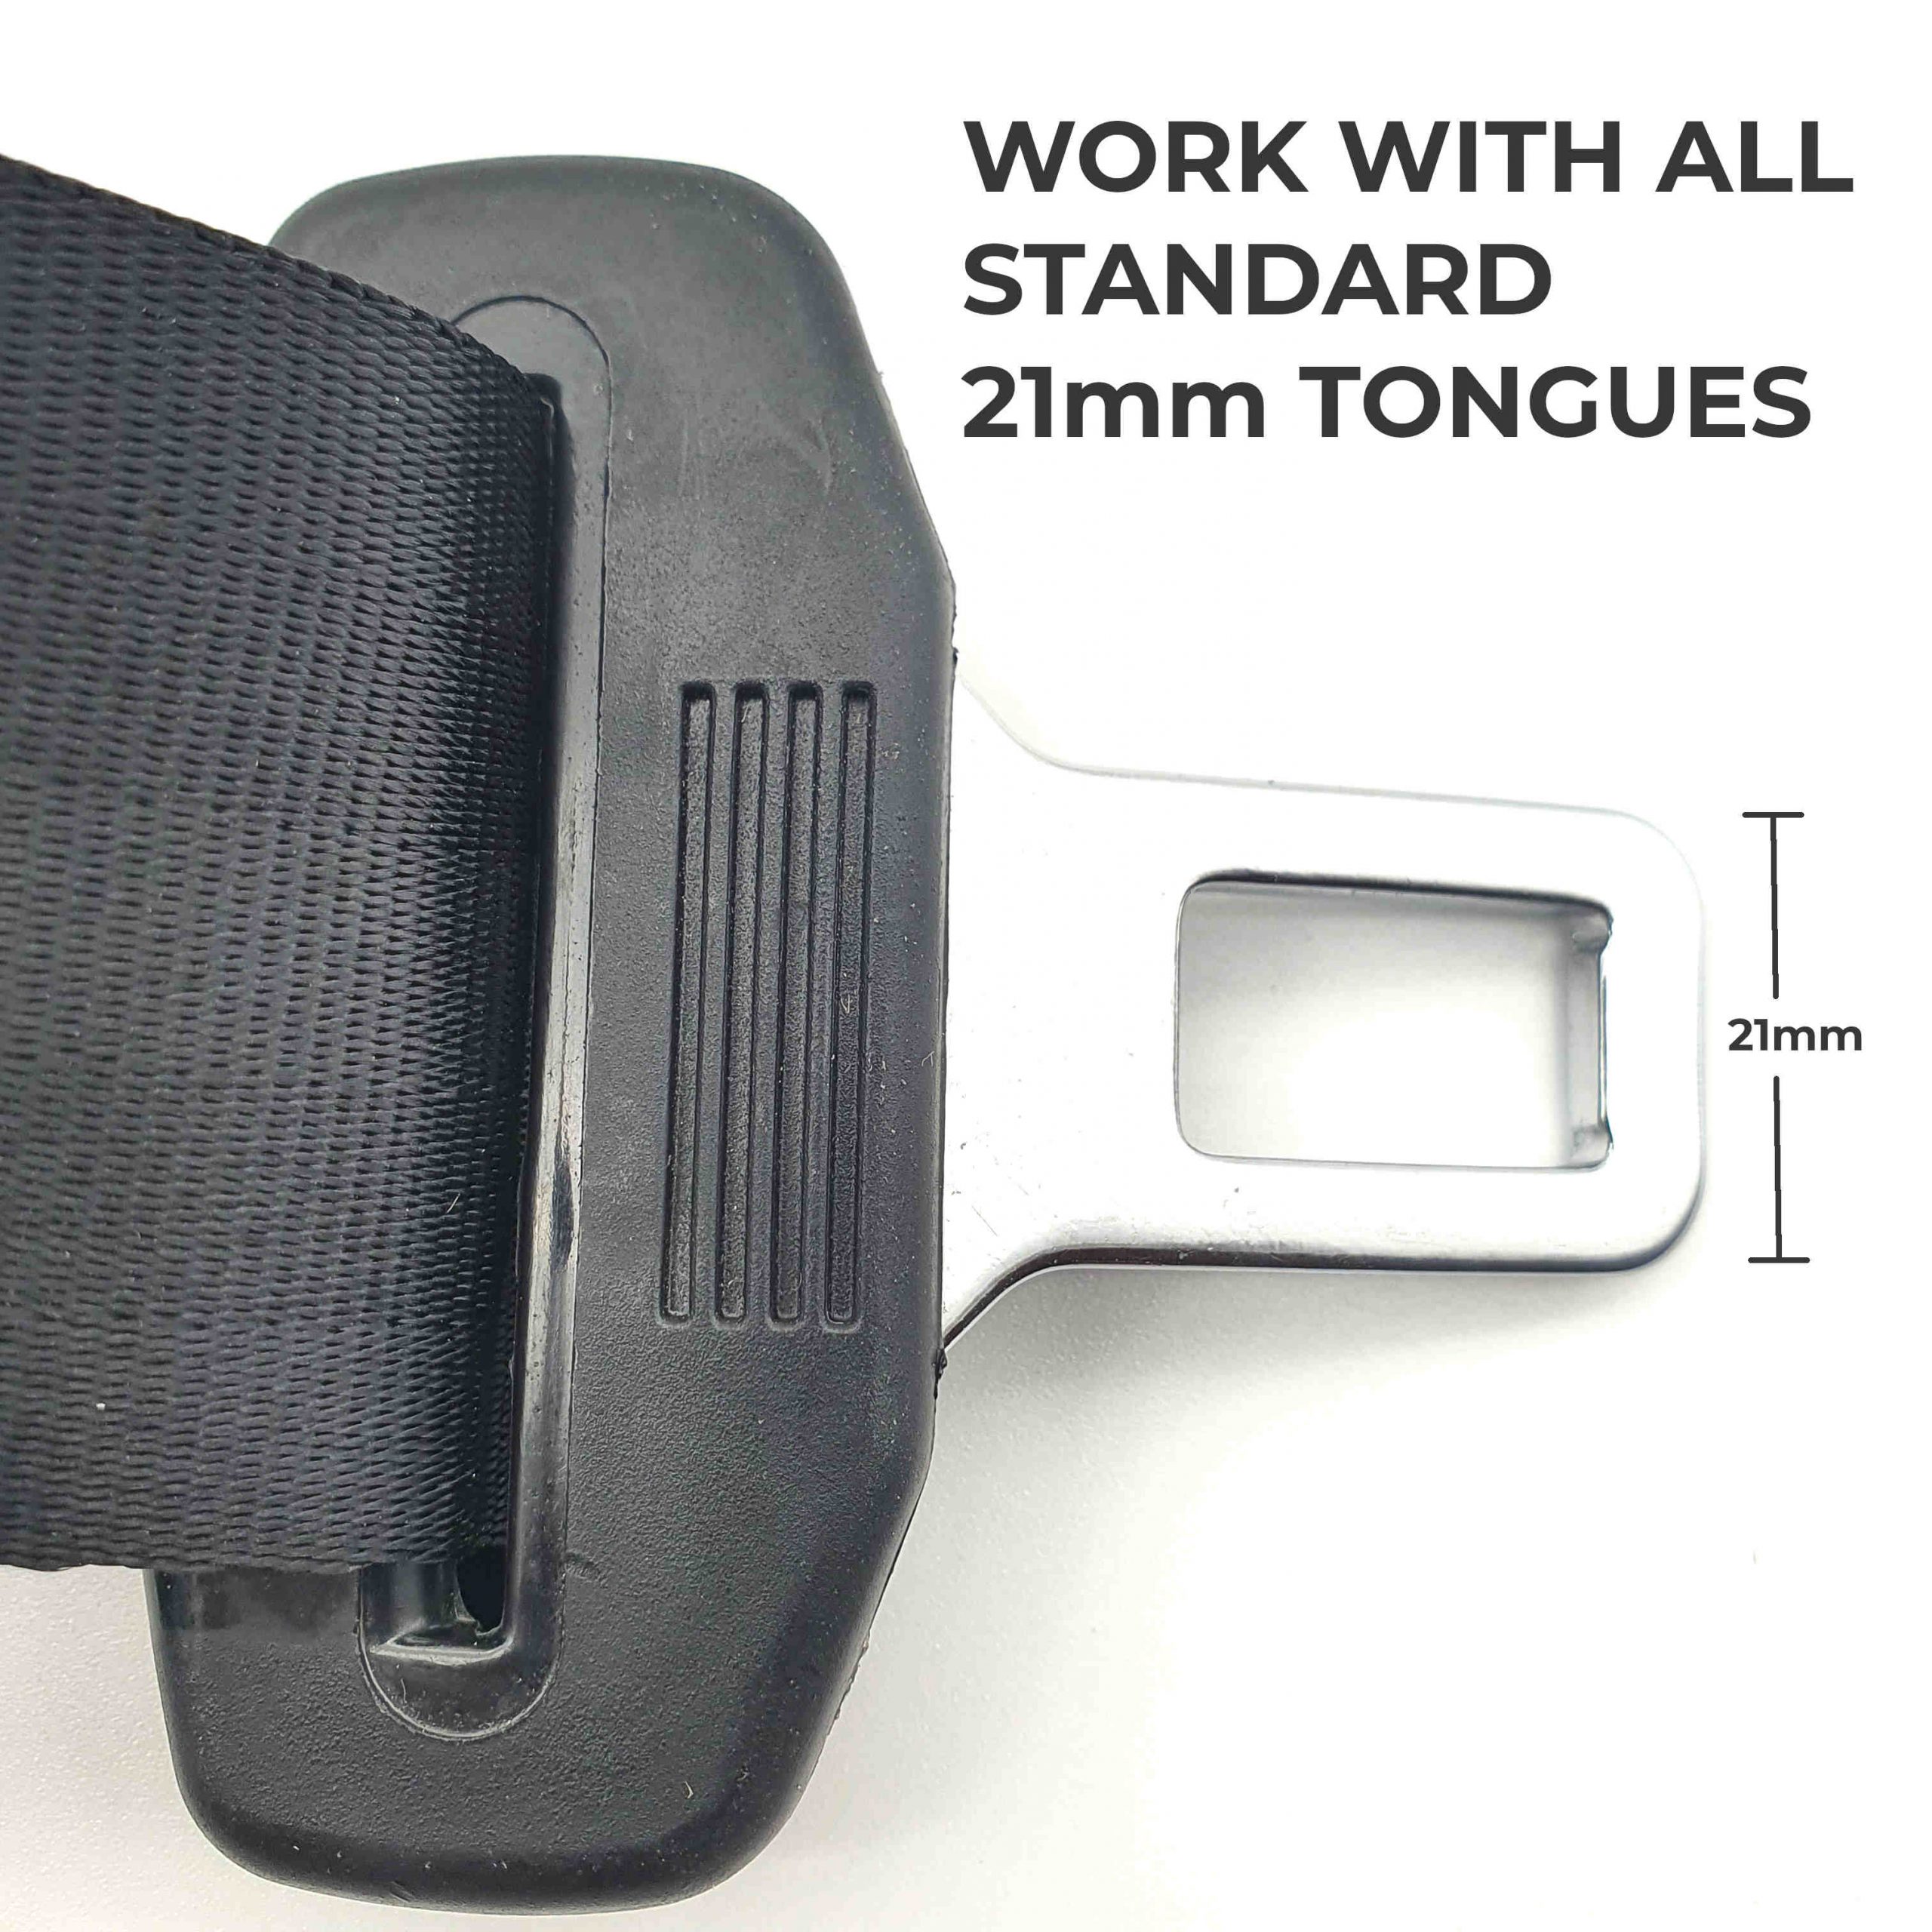 https://certifiedseatbelts.co.uk/wp-content/uploads/2022/11/Tongue-Size-21mm-scaled.jpg